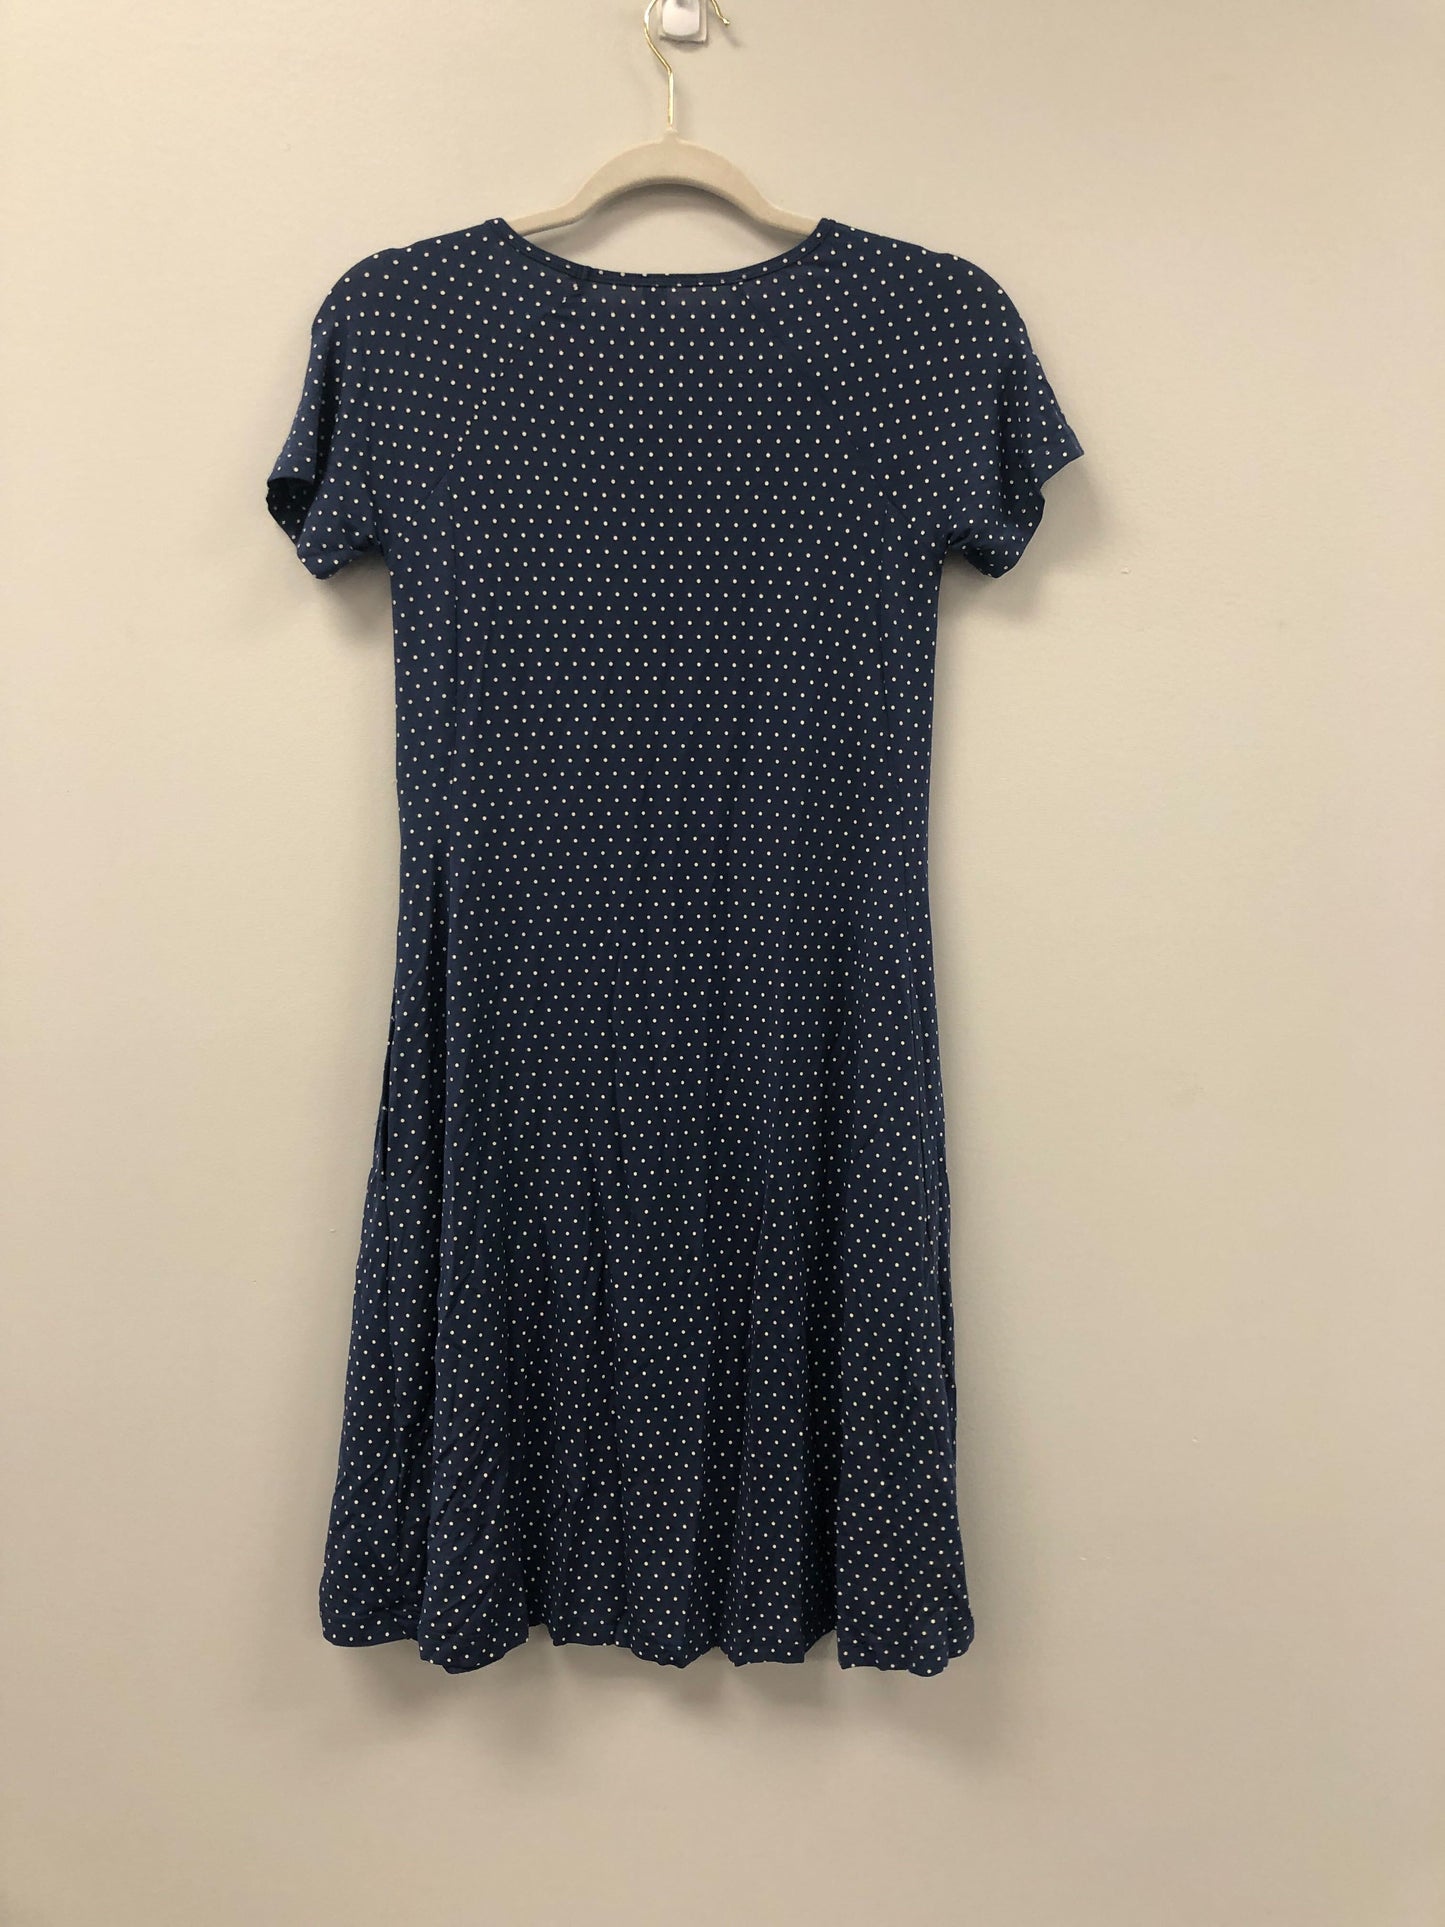 Outlet 5896 - Latched Mama Drawstring T-Shirt Nursing Dress - Blue Grey Dots - Extra Extra Small